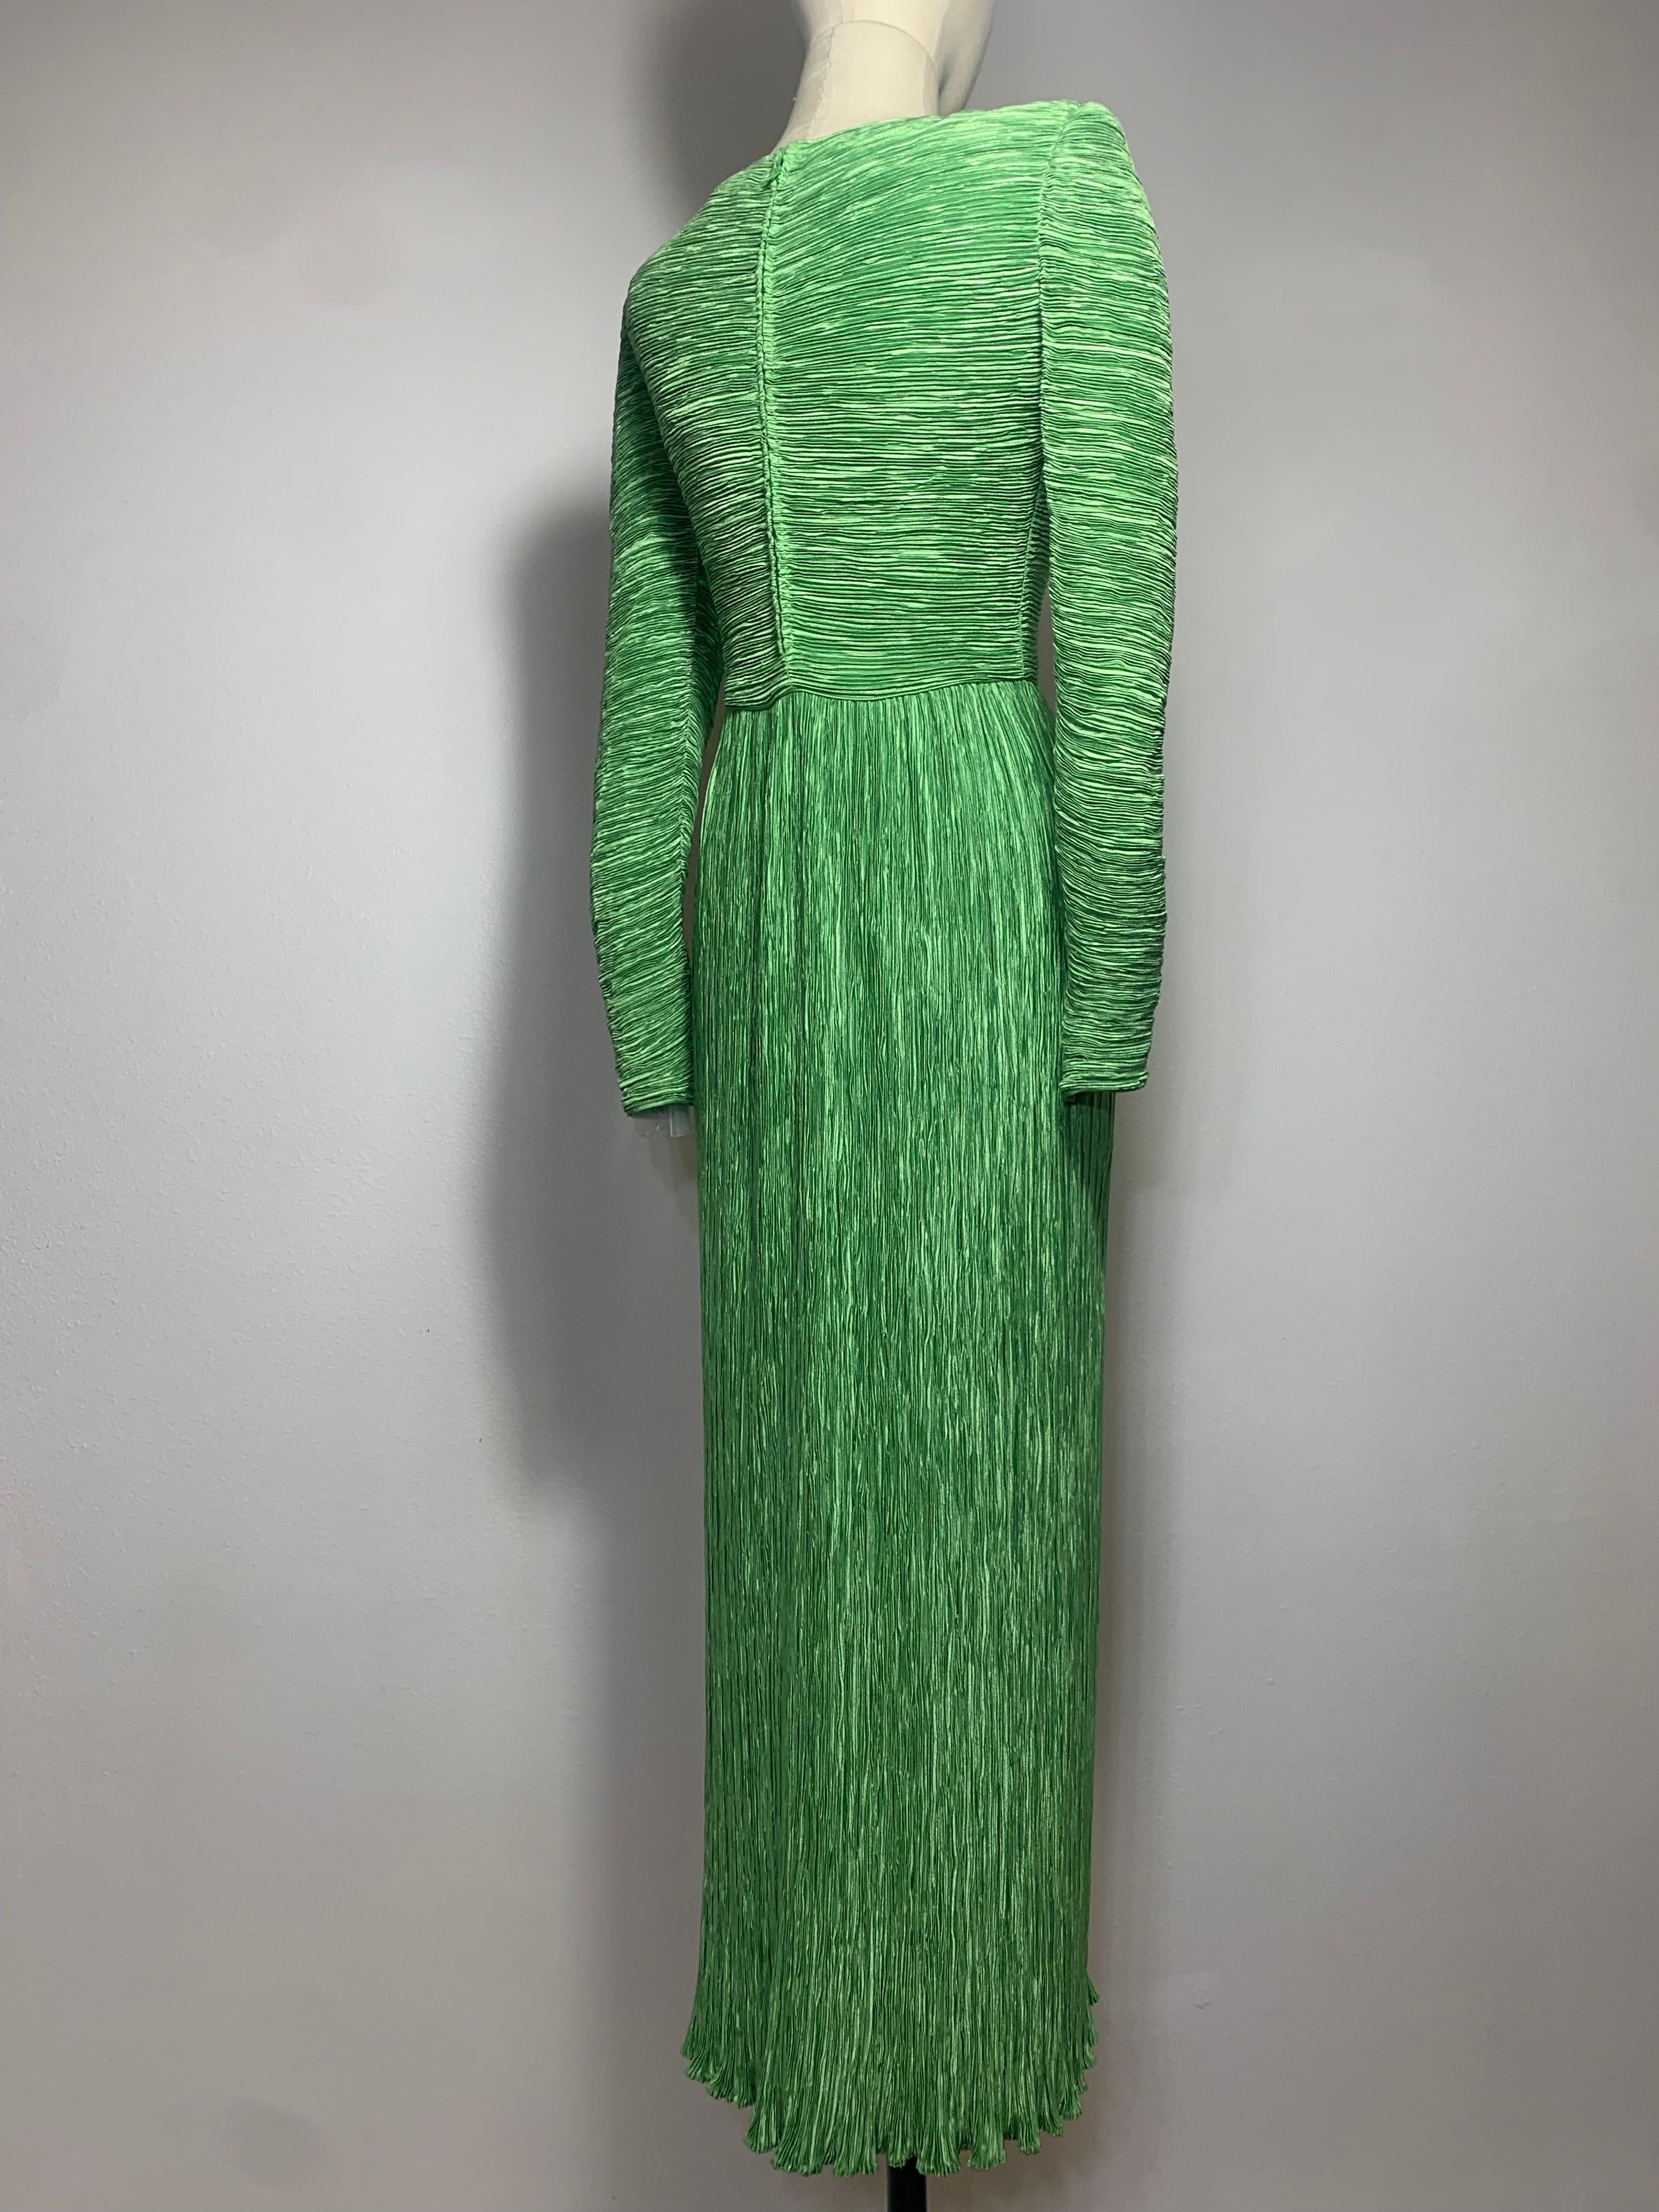 1980s Mary McFadden Jade Green Fortuny-Style Silk Column Gown w Long Sleeves:  Signature McFadden style with an asymmetrically draped bodice and long tapered sleeves. Bodice is lined, skirt is not, for ease of movement.  Slightly padded shoulder